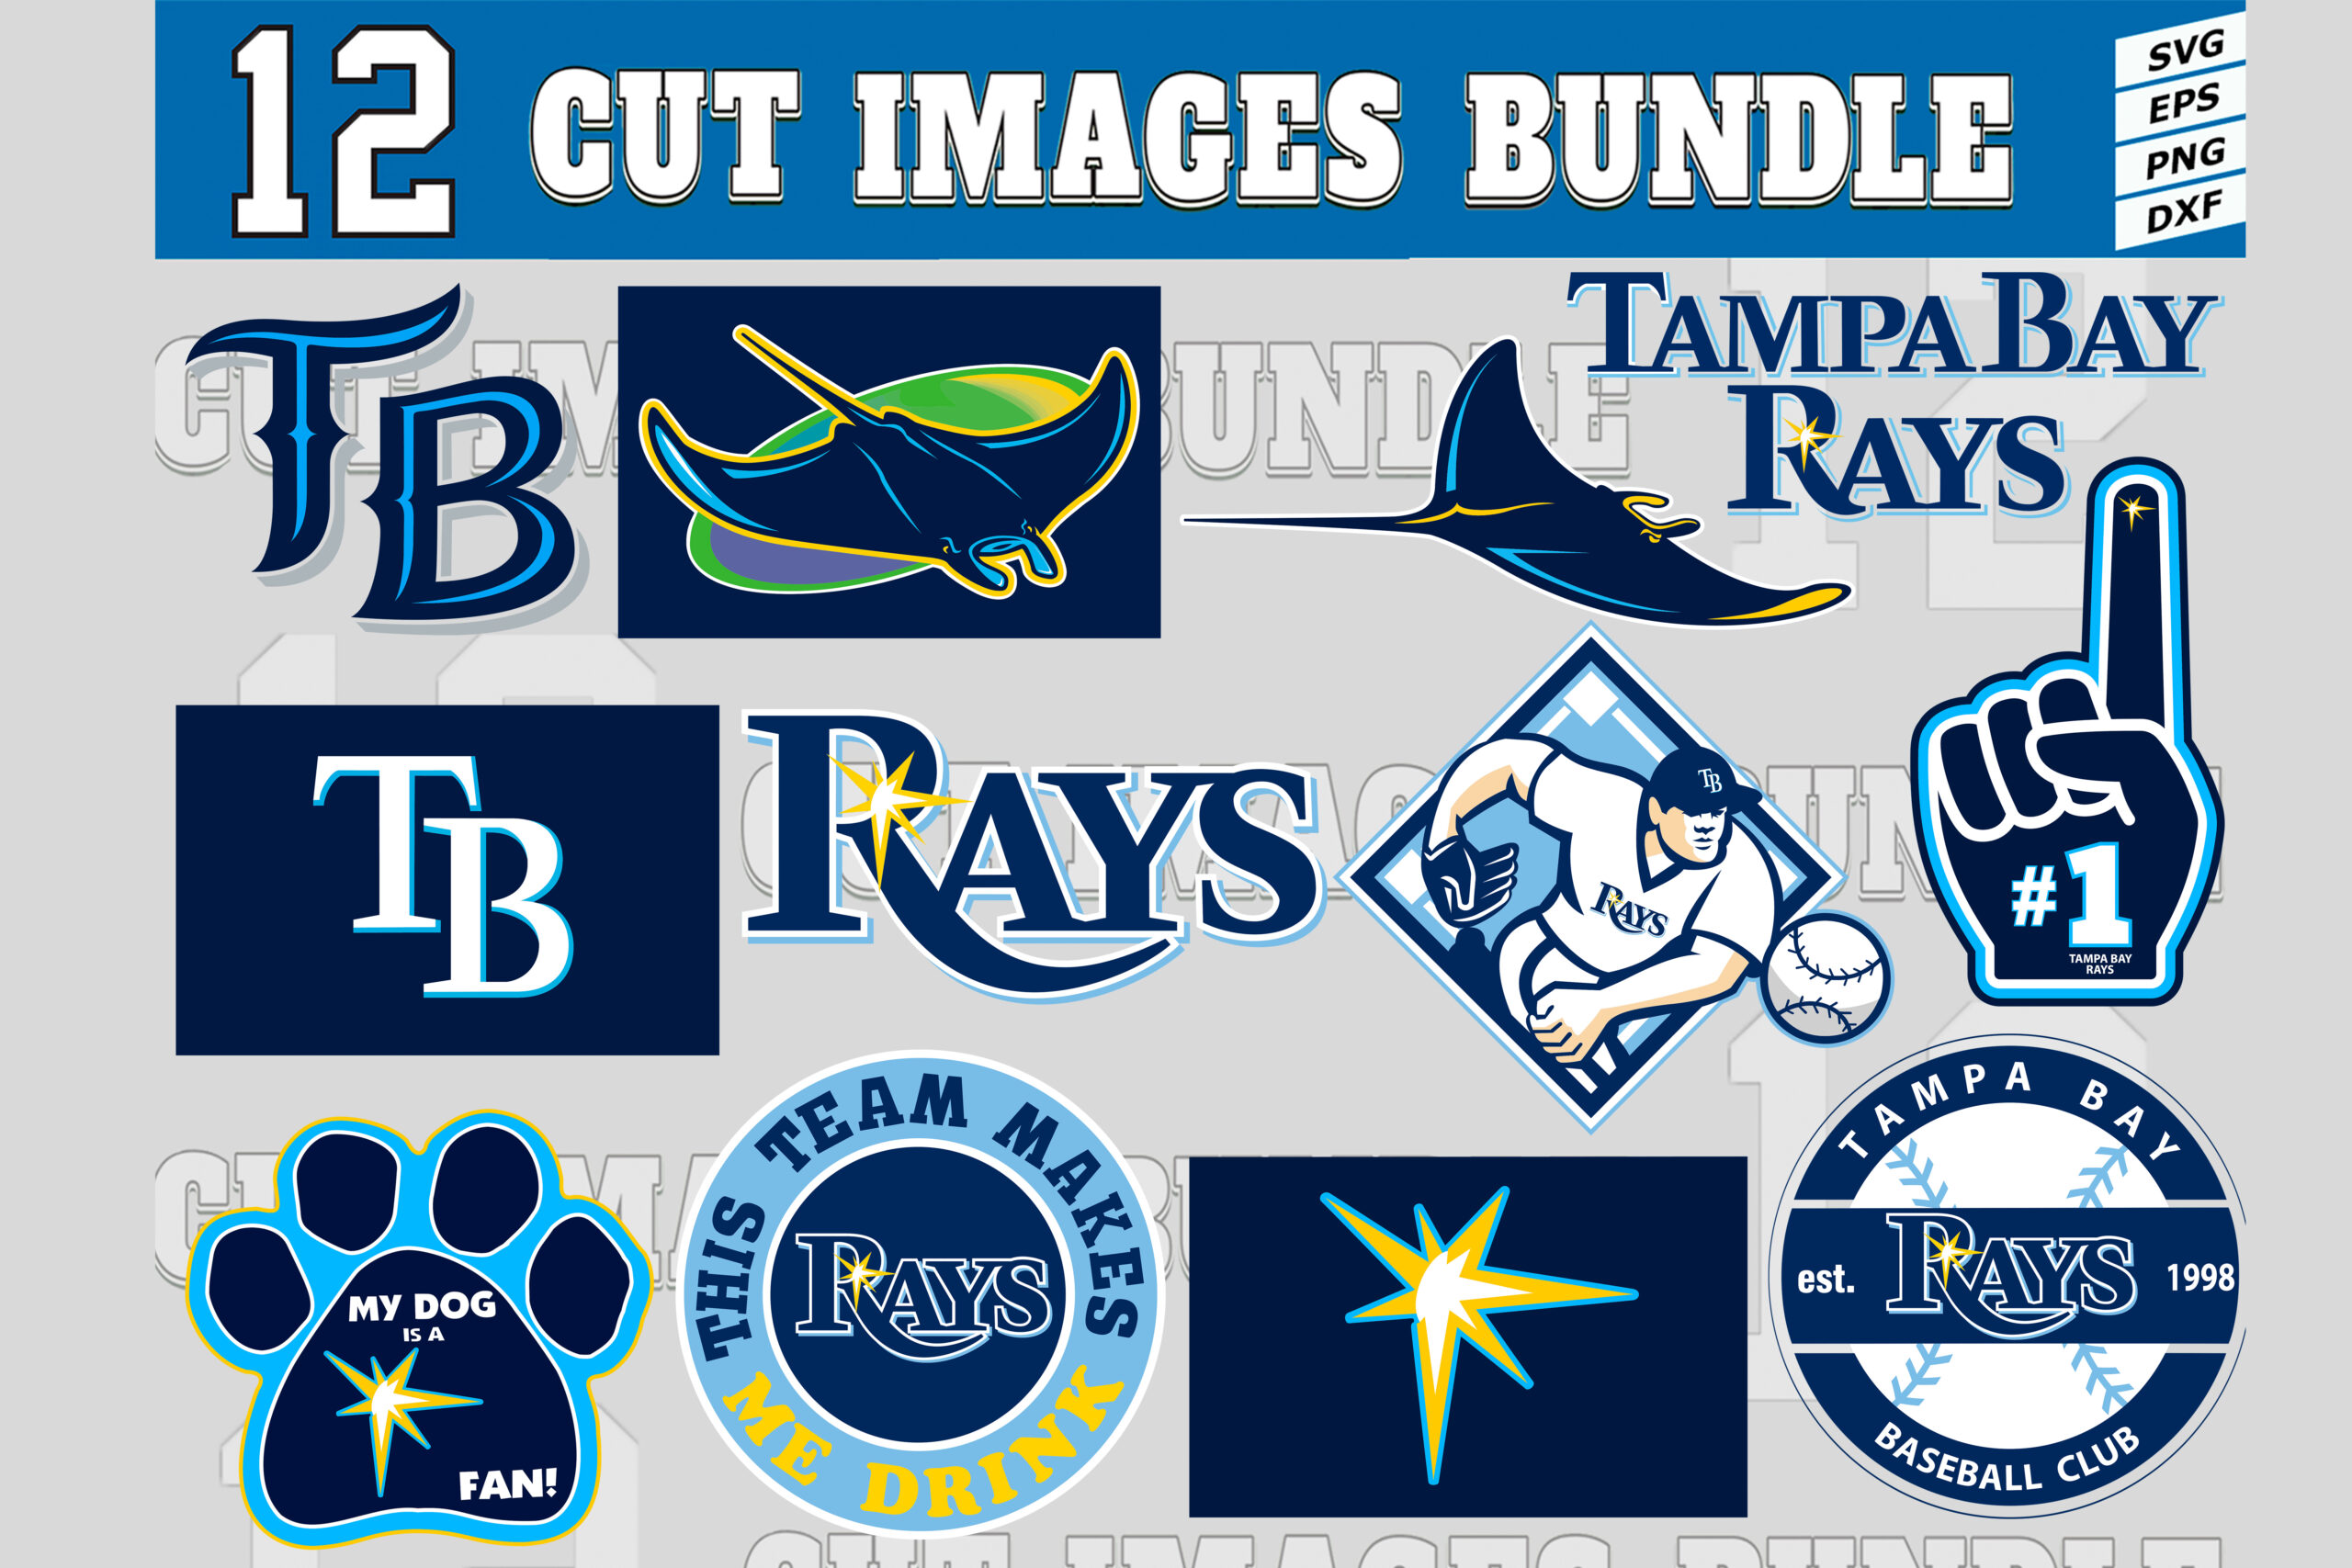 MLB Tampa Bay Rays SVG, SVG Files For Silhouette, Tampa Bay Rays